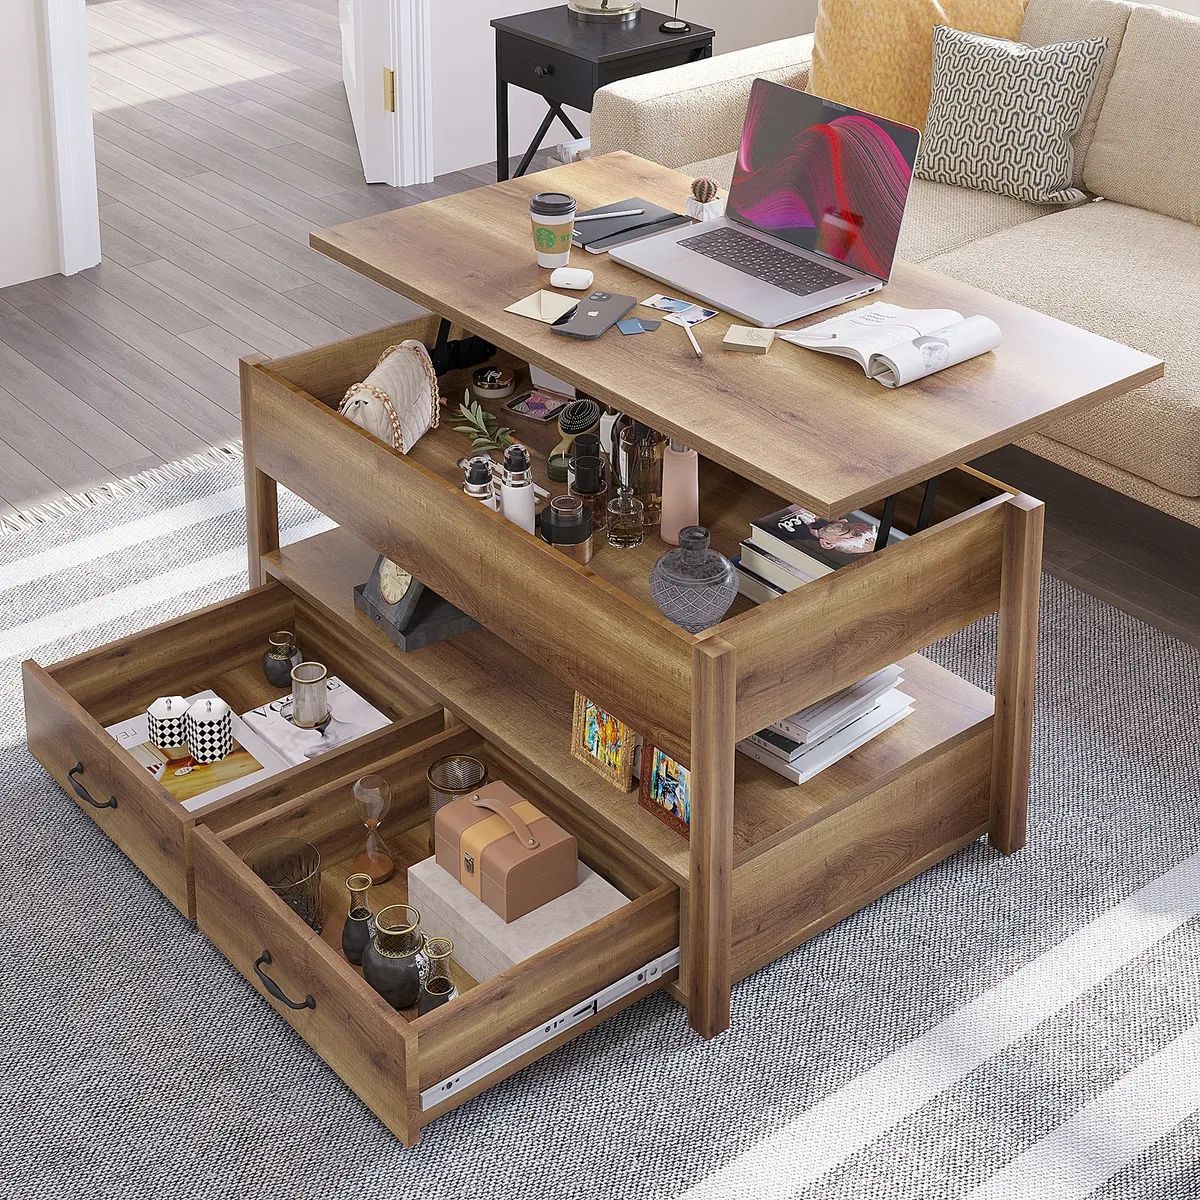 2 Drawer Lift Top Coffee Table Wooden With Hidden Compartment & Storage  Shelves | Ebay Pertaining To Coffee Tables With Hidden Compartments (View 4 of 15)